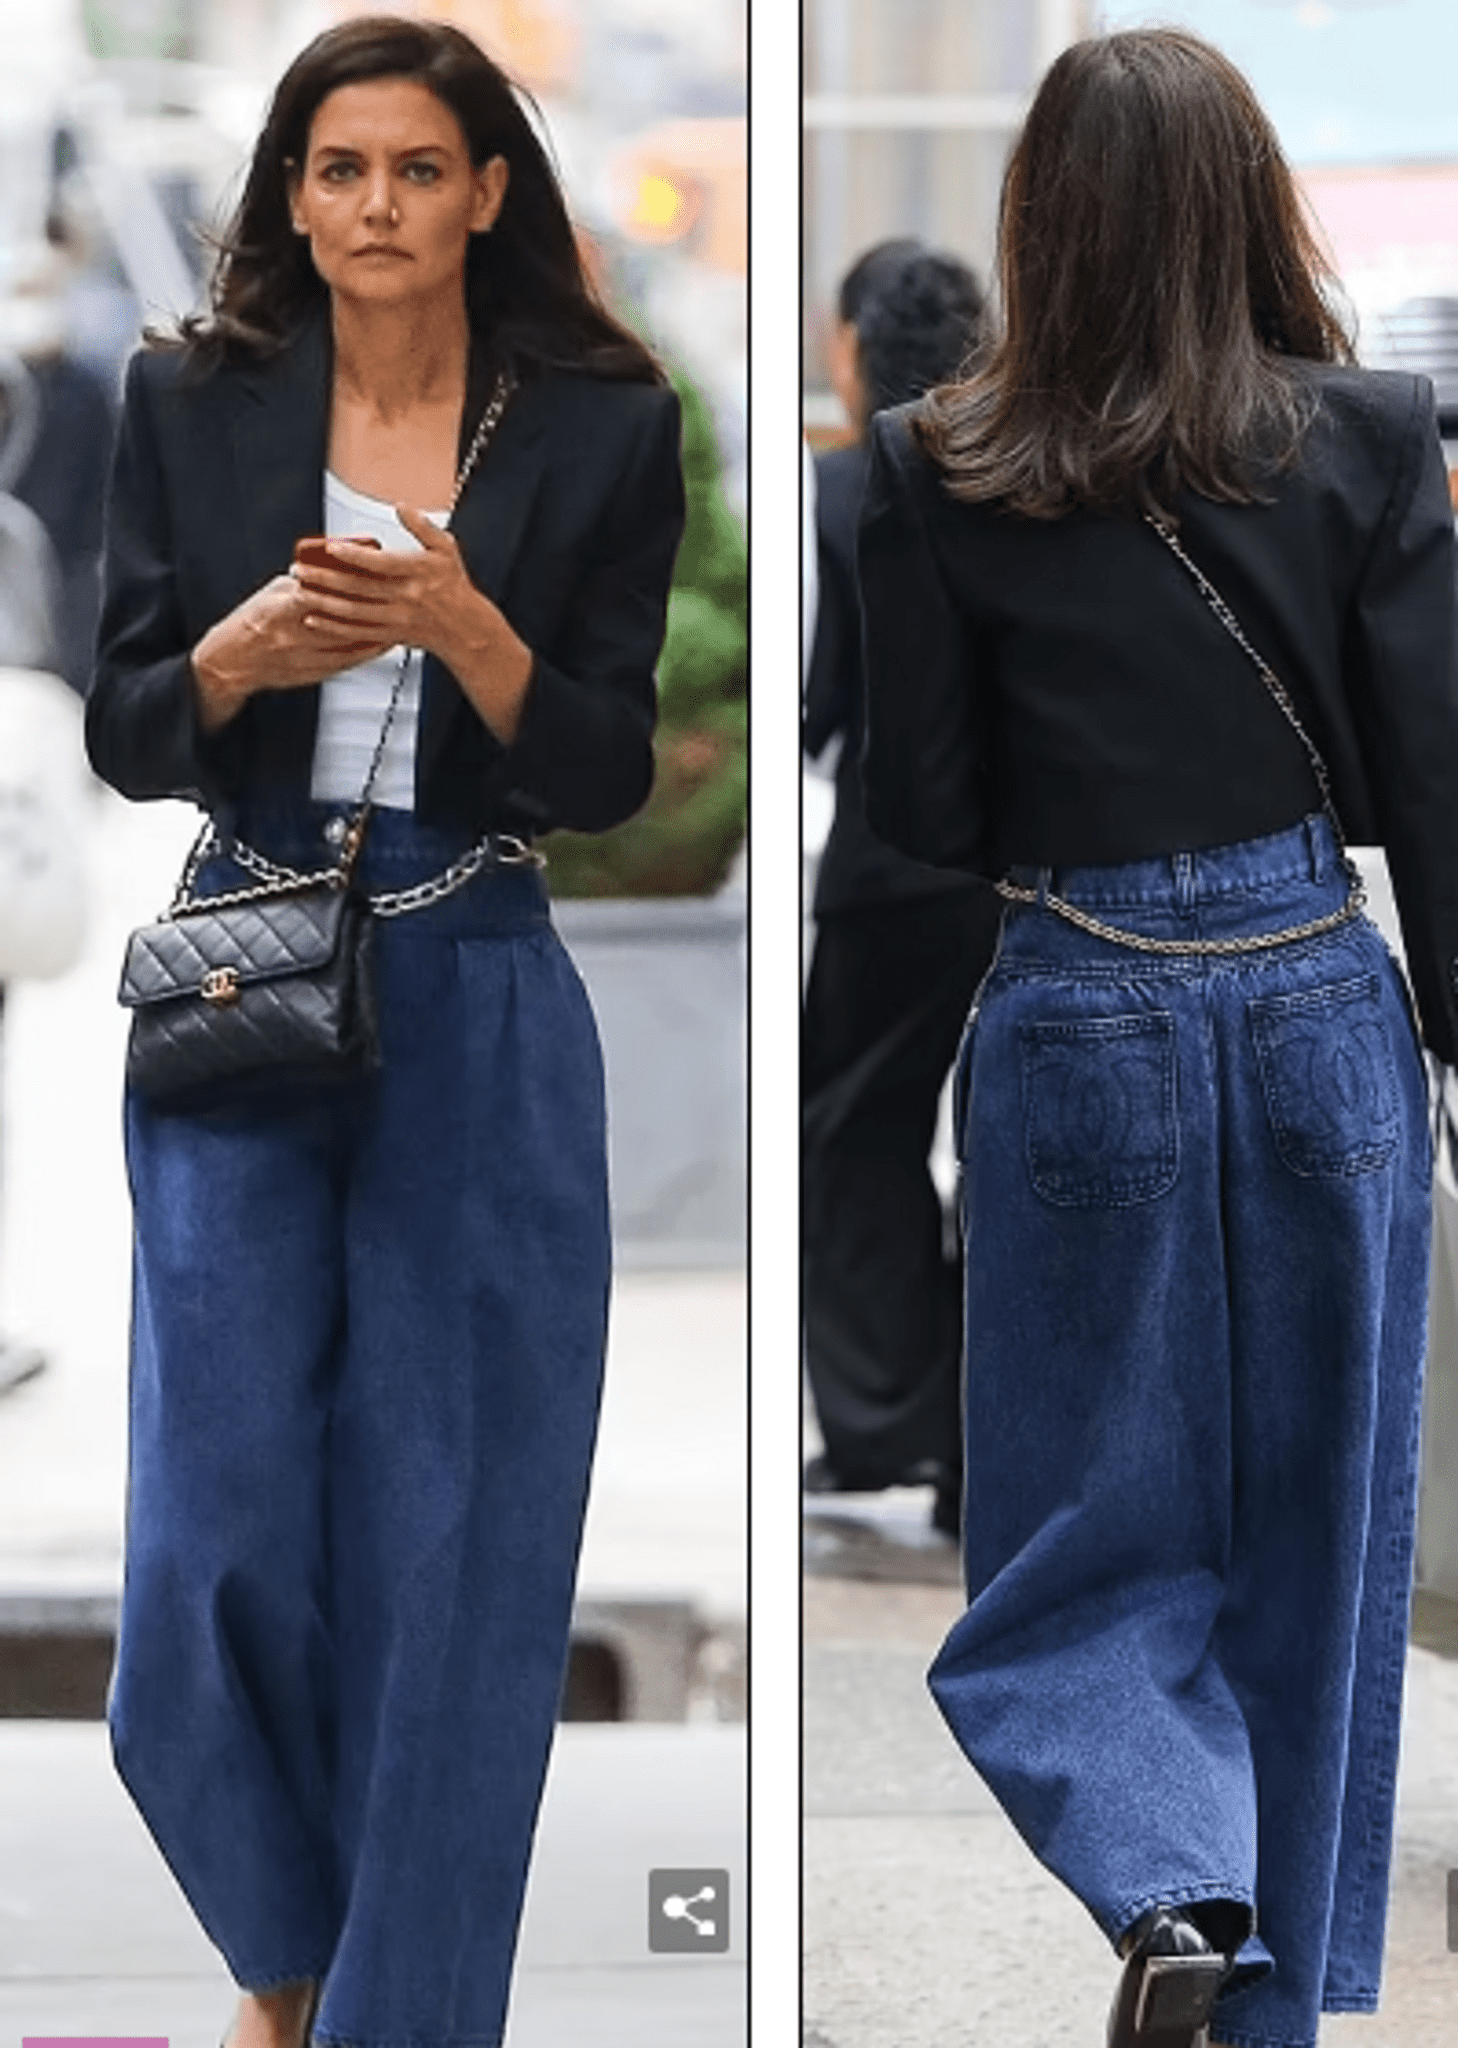 ”katie-holmes-on-walk-in-dream-jeans-that-will-fit-into-any-wardrobe”